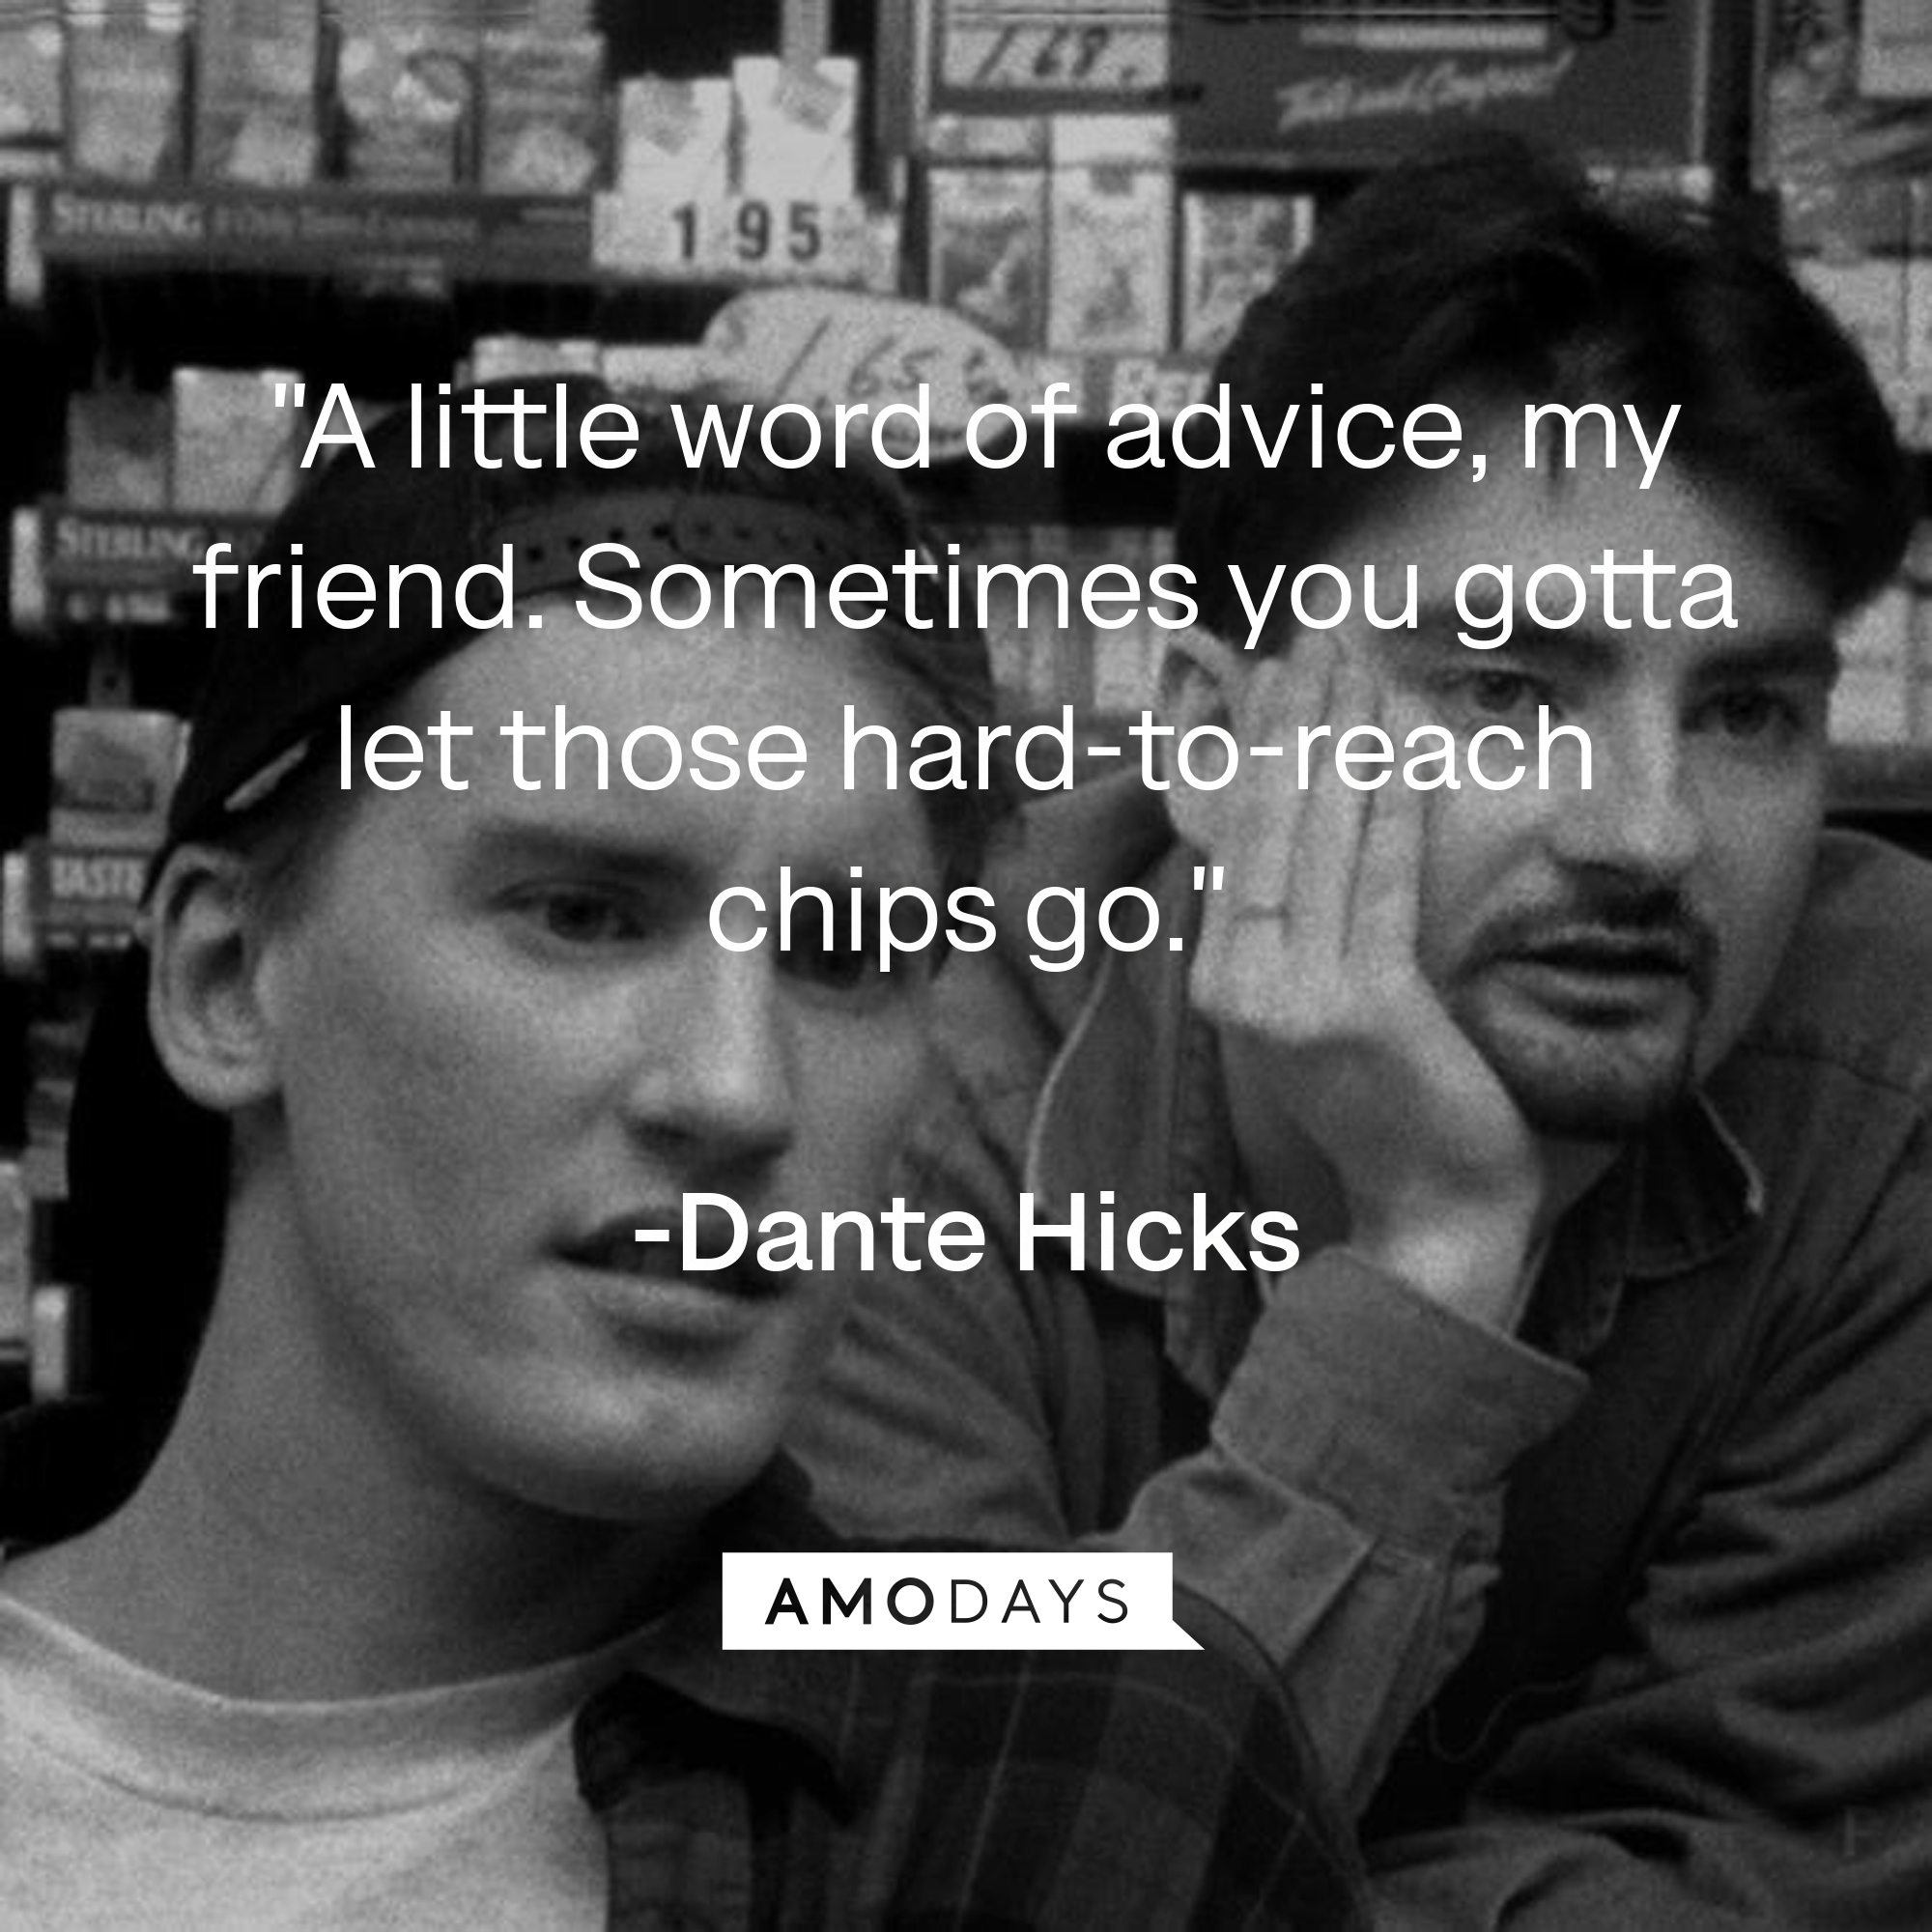 Dante Hicks' quote, "A little word of advice, my friend. Sometimes you gotta let those hard-to-reach chips go." | Source: Facebook/ClerksMovie